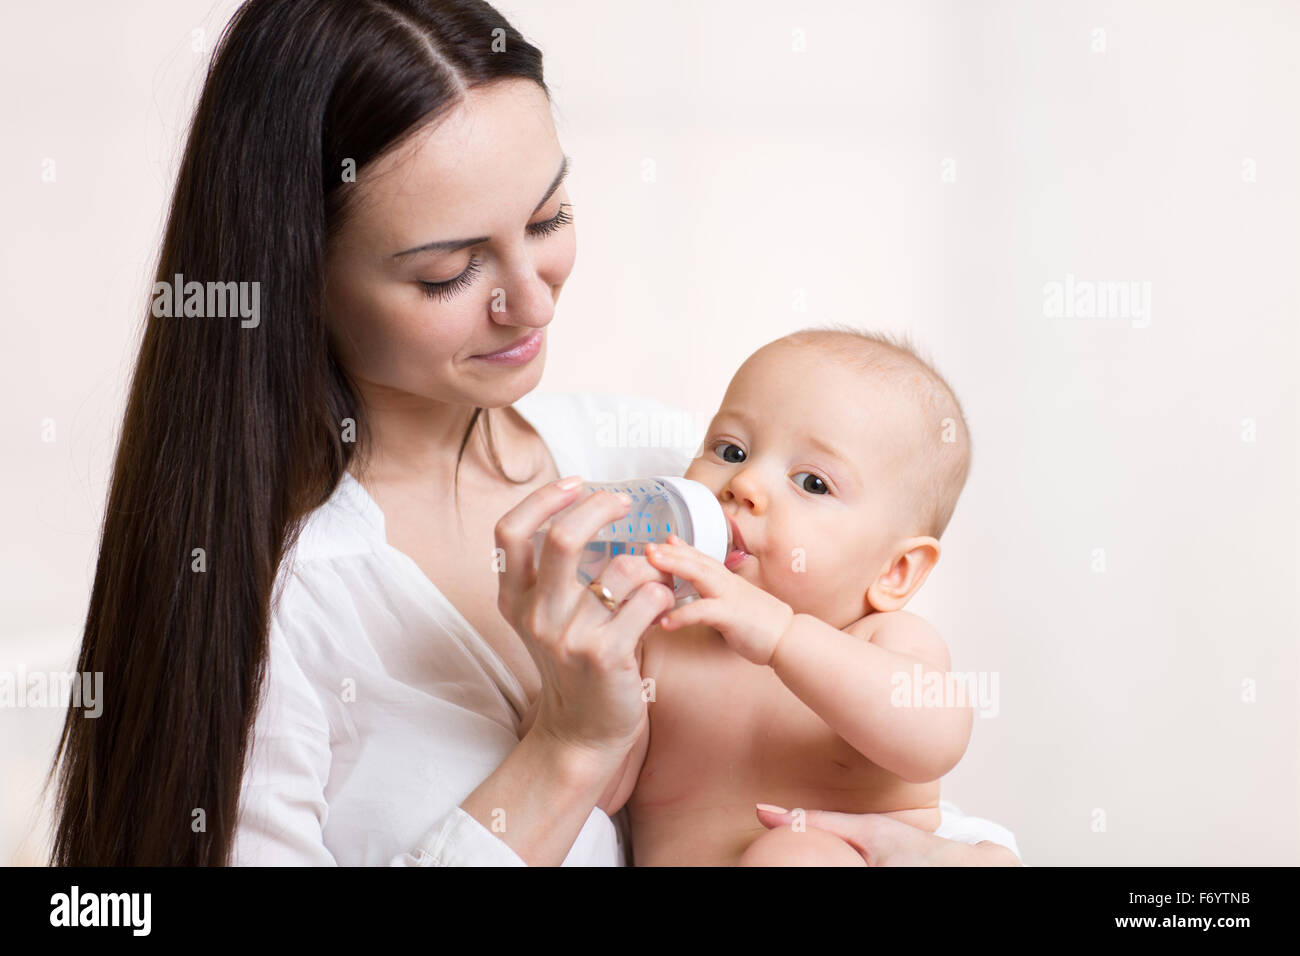 happy mother feeds her baby bottle Stock Photo